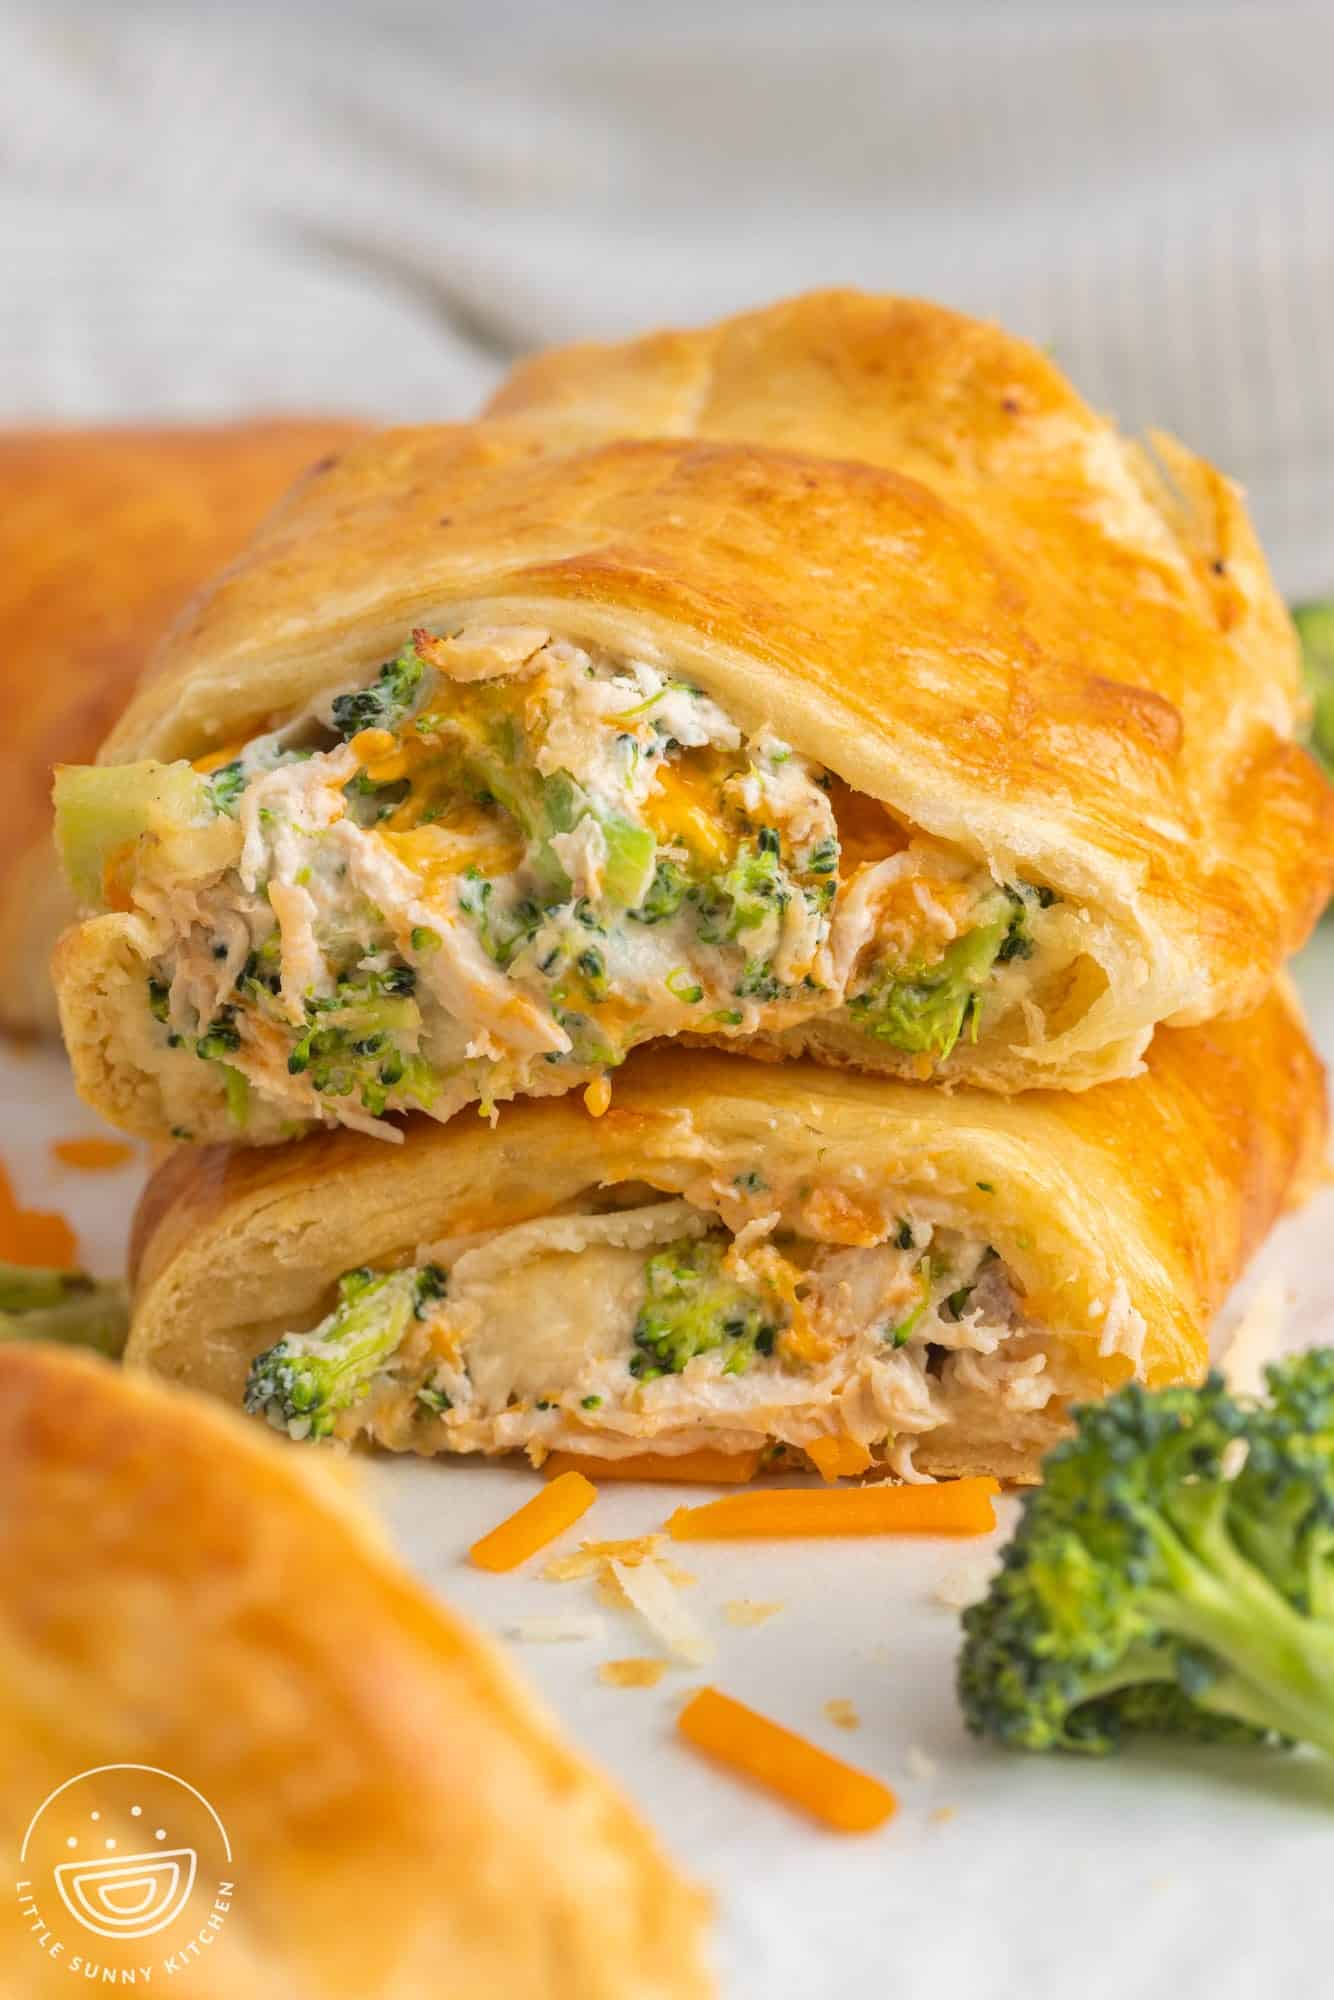 Stacked 2 pieces of crescent bakes filled with cheesy chicken and broccoli